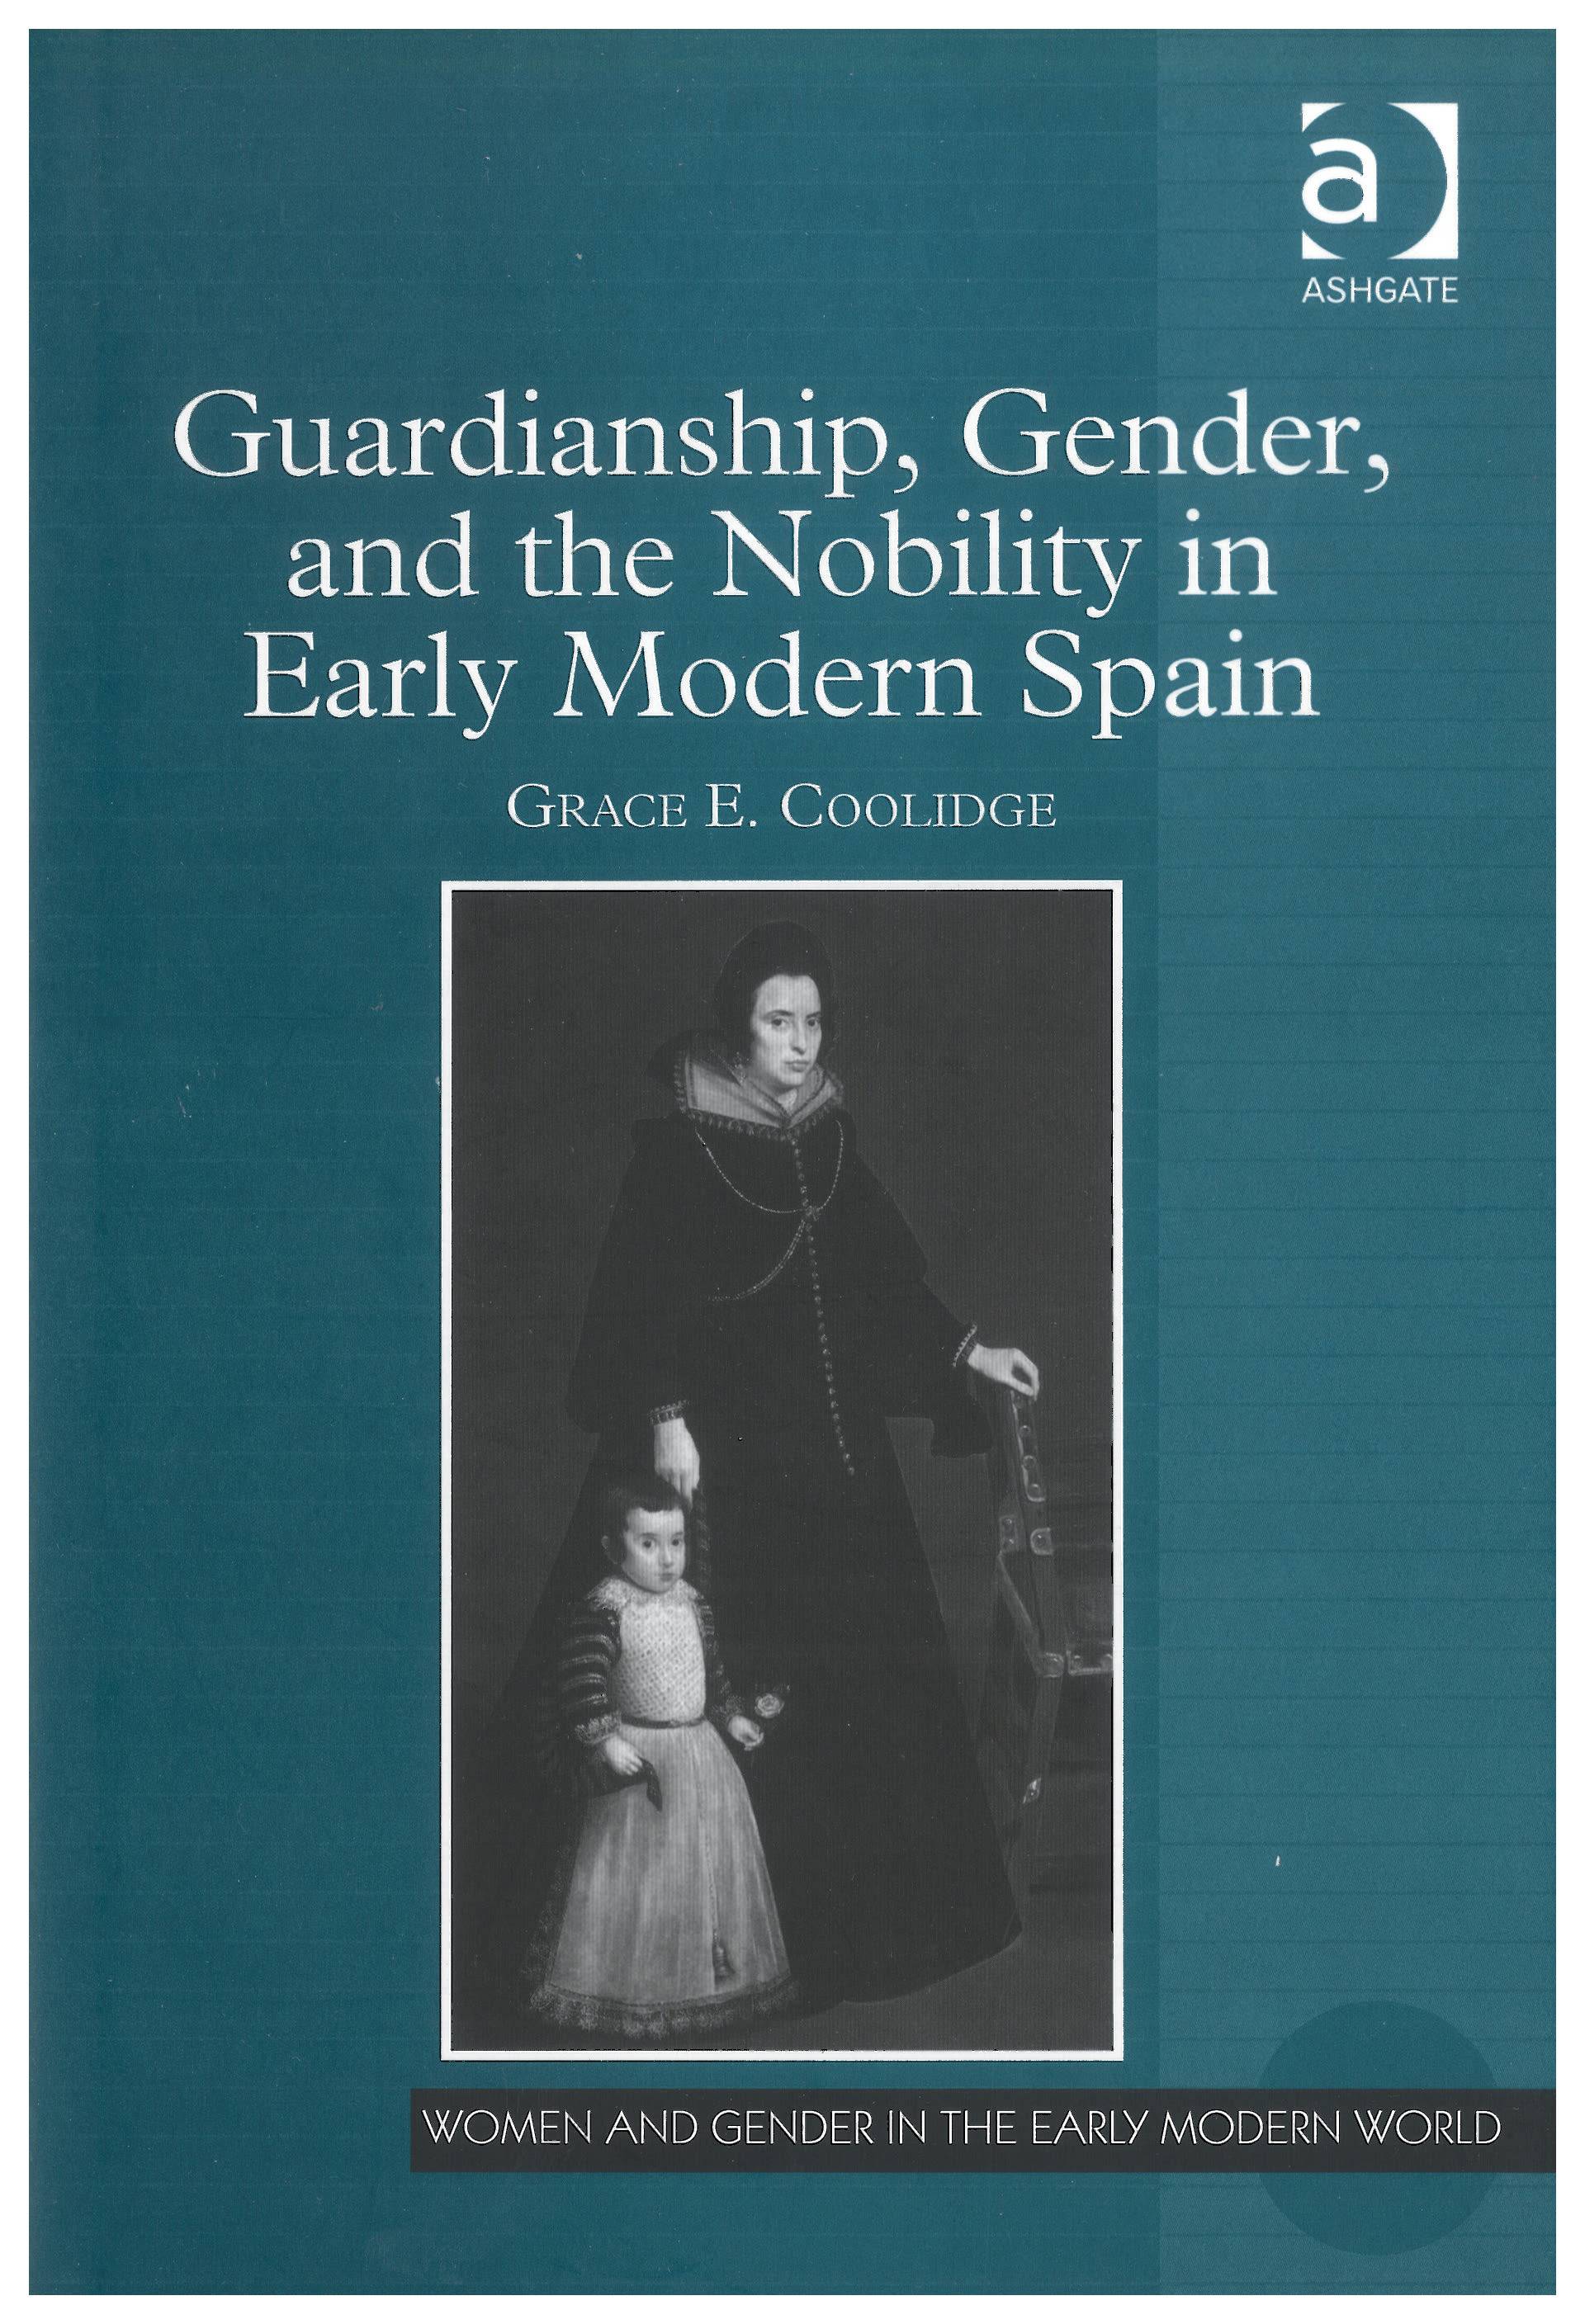 Guardianship, Gender, and Nobility in Early Modern Spain